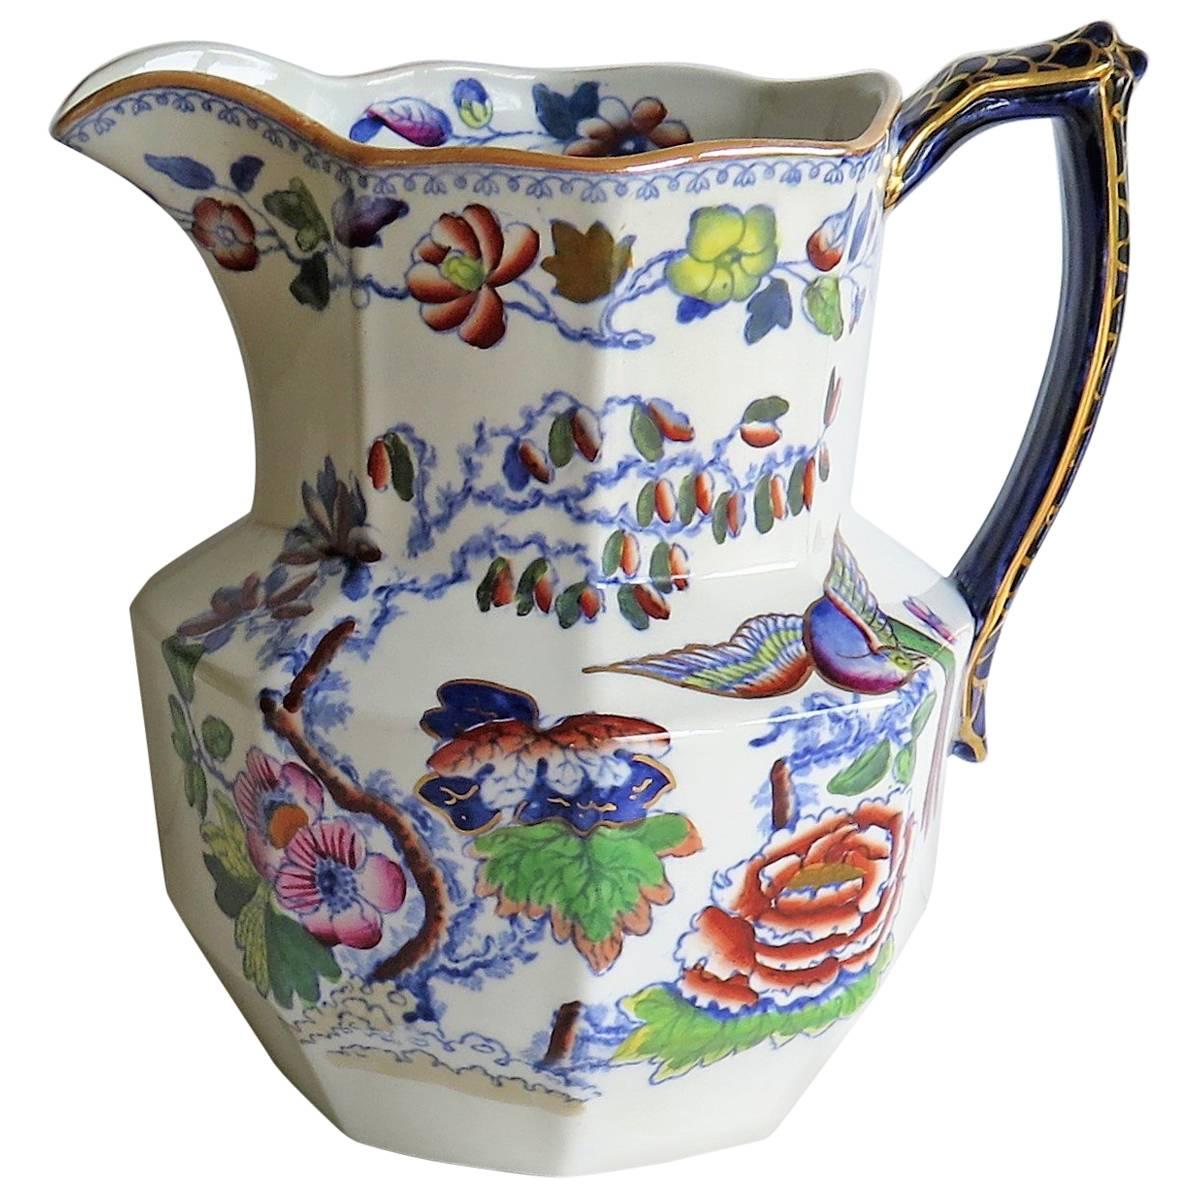 Large Mason's Ironstone Jug or Pitcher in Flying Bird Pattern, late 19th Century